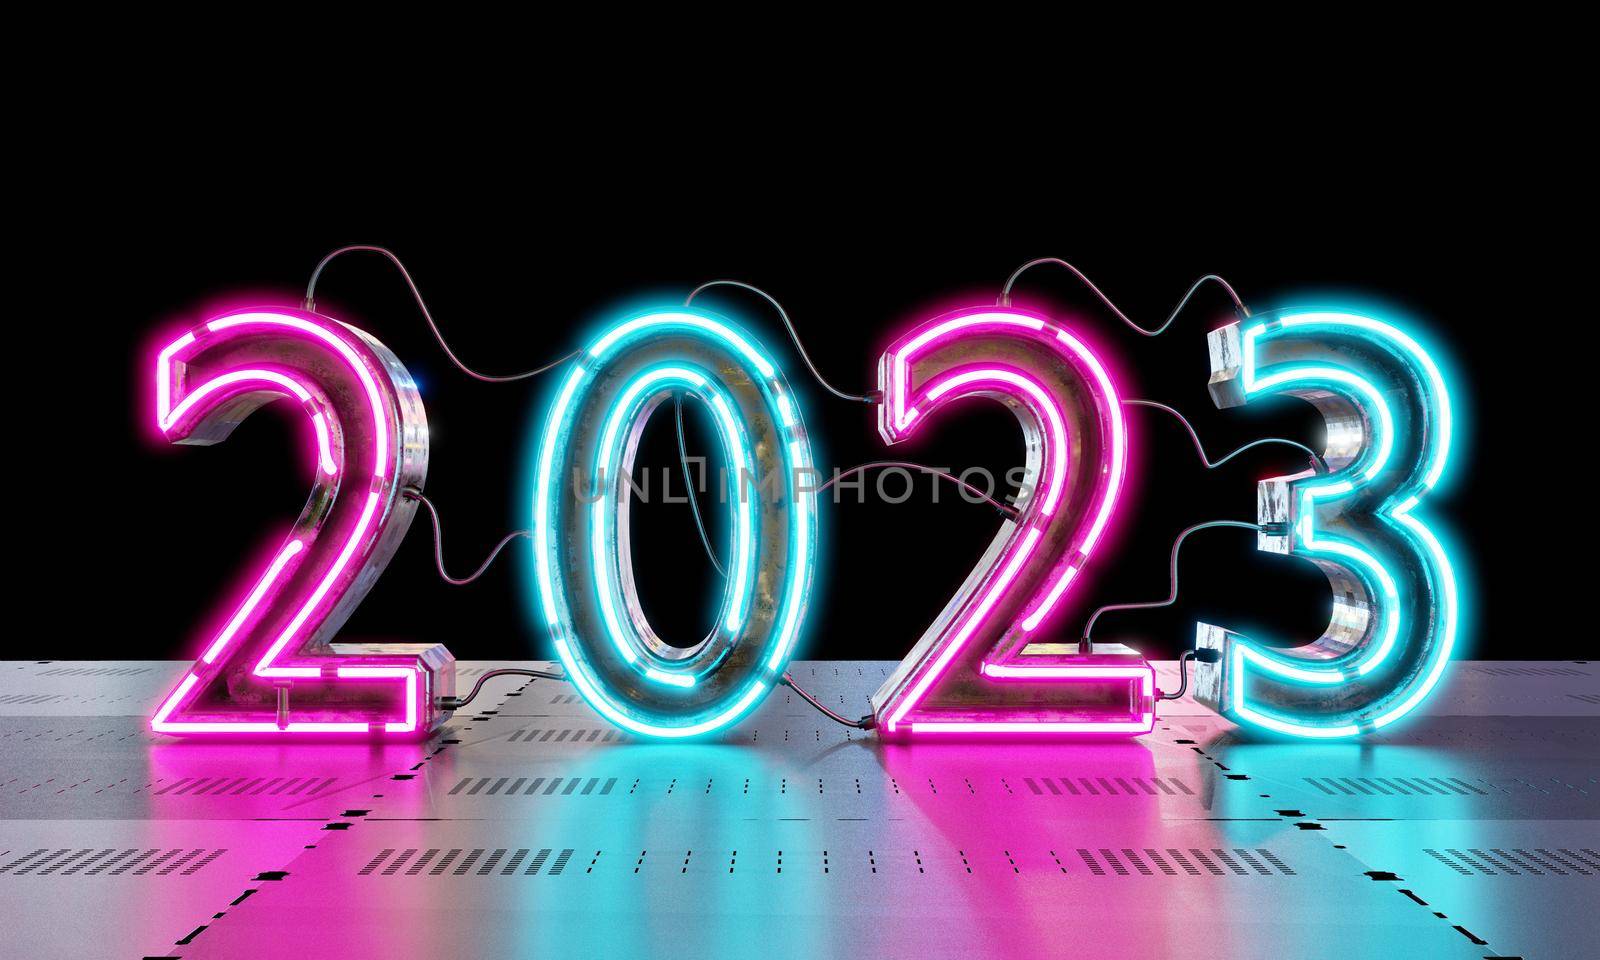 2023 neon lighting on metallic floor background. Technology and Abstract wallpaper concept. Happy new year theme. 3d illustration rendering